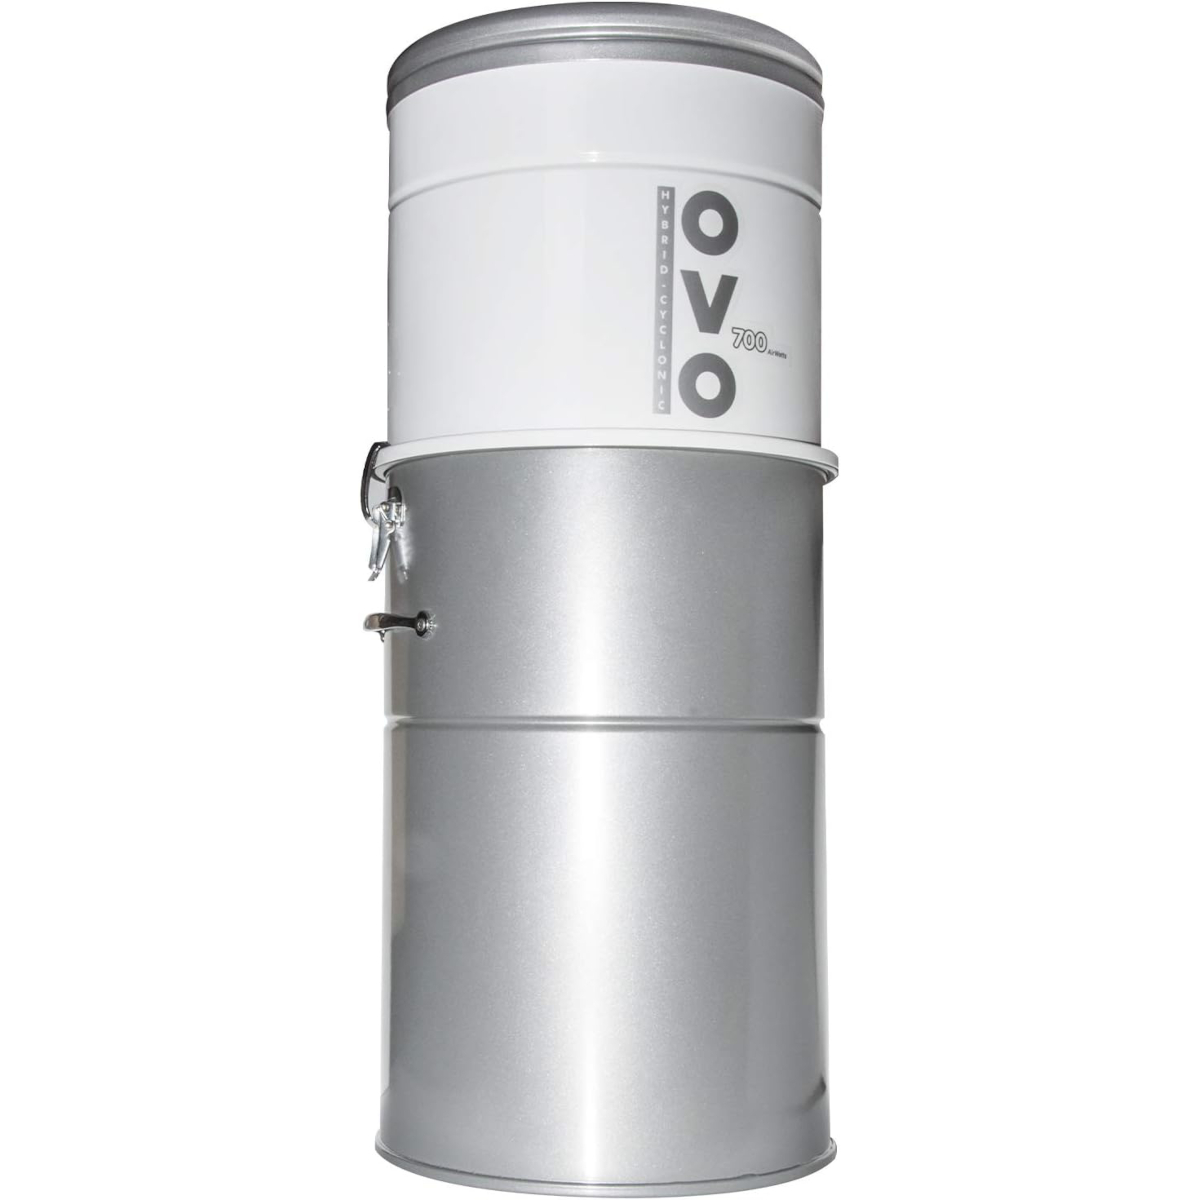 A OVO Central Vacuum Filtration System is on a blank white background.